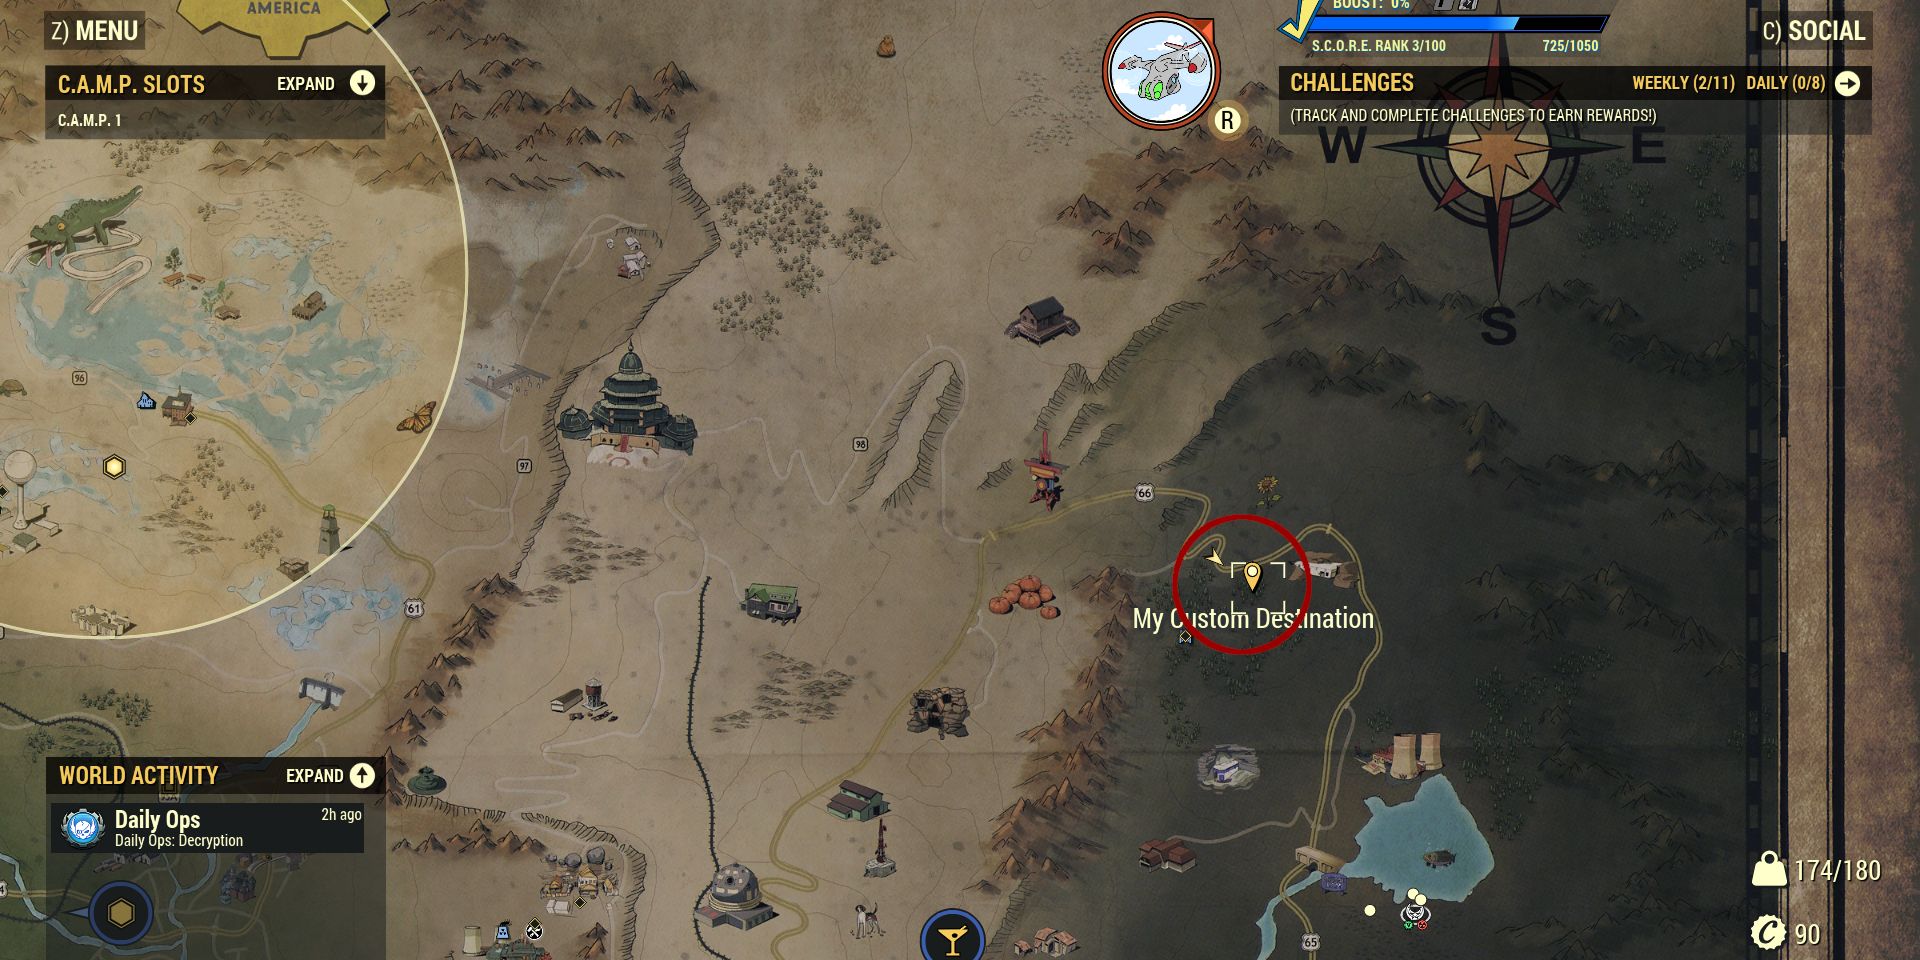 Image of Highland Marsh on the map where mirelurks can be found in Fallout 76